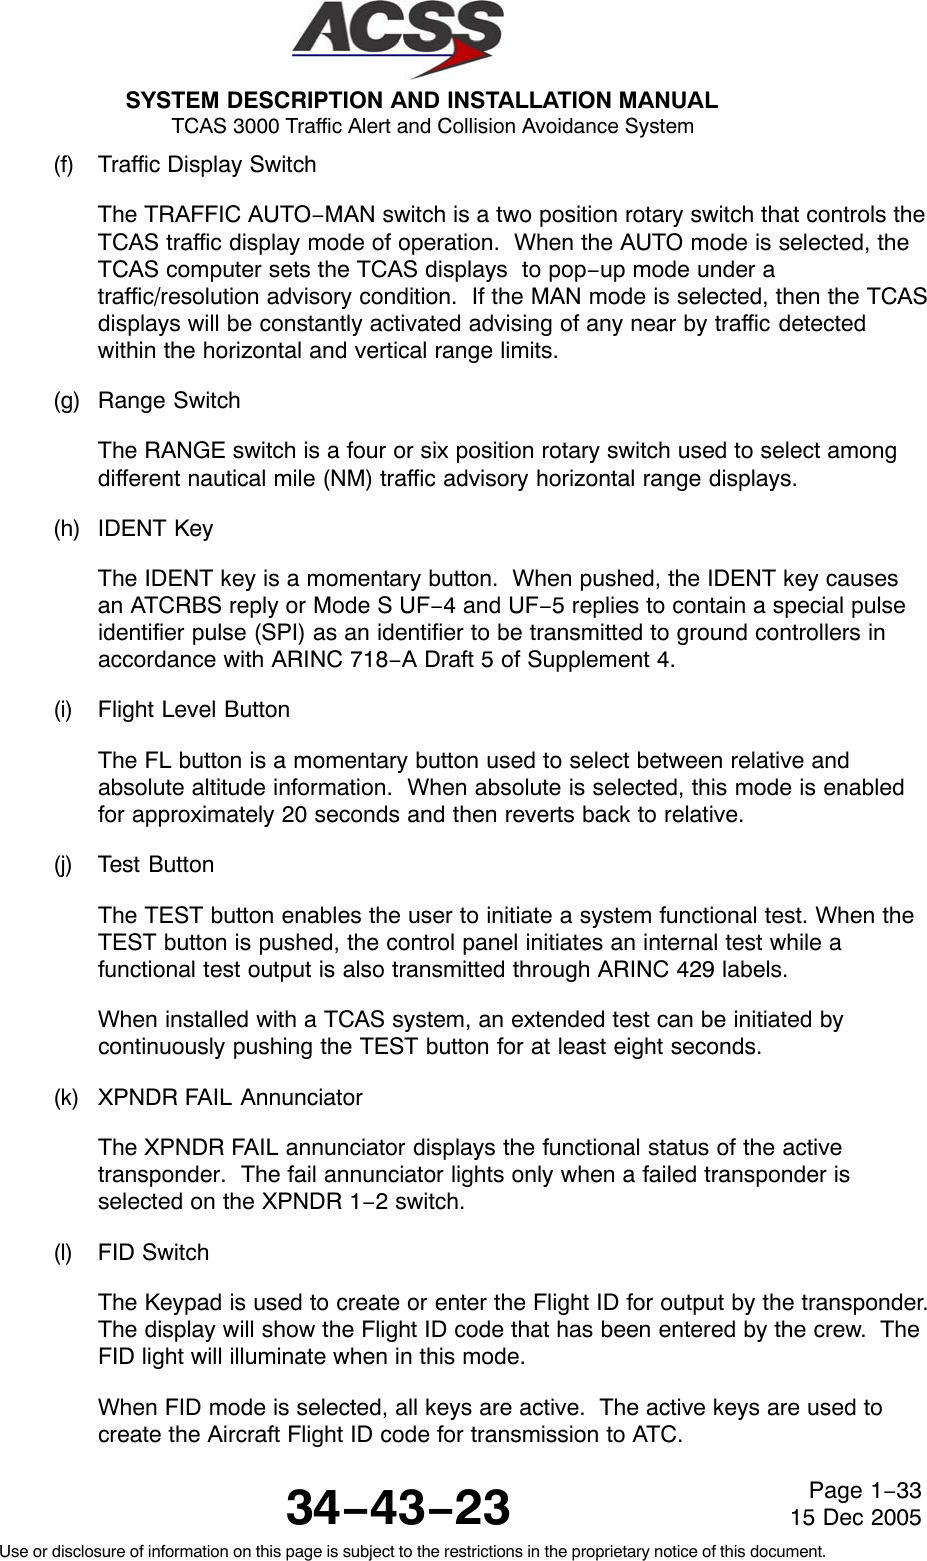 SYSTEM DESCRIPTION AND INSTALLATION MANUAL TCAS 3000 Traffic Alert and Collision Avoidance System34−43−23Use or disclosure of information on this page is subject to the restrictions in the proprietary notice of this document.Page 1−3315 Dec 2005(f) Traffic Display SwitchThe TRAFFIC AUTO−MAN switch is a two position rotary switch that controls theTCAS traffic display mode of operation.  When the AUTO mode is selected, theTCAS computer sets the TCAS displays  to pop−up mode under atraffic/resolution advisory condition.  If the MAN mode is selected, then the TCASdisplays will be constantly activated advising of any near by traffic detectedwithin the horizontal and vertical range limits.(g) Range SwitchThe RANGE switch is a four or six position rotary switch used to select amongdifferent nautical mile (NM) traffic advisory horizontal range displays.(h) IDENT KeyThe IDENT key is a momentary button.  When pushed, the IDENT key causesan ATCRBS reply or Mode S UF−4 and UF−5 replies to contain a special pulseidentifier pulse (SPI) as an identifier to be transmitted to ground controllers inaccordance with ARINC 718−A Draft 5 of Supplement 4.(i) Flight Level ButtonThe FL button is a momentary button used to select between relative andabsolute altitude information.  When absolute is selected, this mode is enabledfor approximately 20 seconds and then reverts back to relative.(j) Test ButtonThe TEST button enables the user to initiate a system functional test. When theTEST button is pushed, the control panel initiates an internal test while afunctional test output is also transmitted through ARINC 429 labels.When installed with a TCAS system, an extended test can be initiated bycontinuously pushing the TEST button for at least eight seconds.(k) XPNDR FAIL AnnunciatorThe XPNDR FAIL annunciator displays the functional status of the activetransponder.  The fail annunciator lights only when a failed transponder isselected on the XPNDR 1−2 switch.(l) FID SwitchThe Keypad is used to create or enter the Flight ID for output by the transponder.The display will show the Flight ID code that has been entered by the crew.  TheFID light will illuminate when in this mode.When FID mode is selected, all keys are active.  The active keys are used tocreate the Aircraft Flight ID code for transmission to ATC.